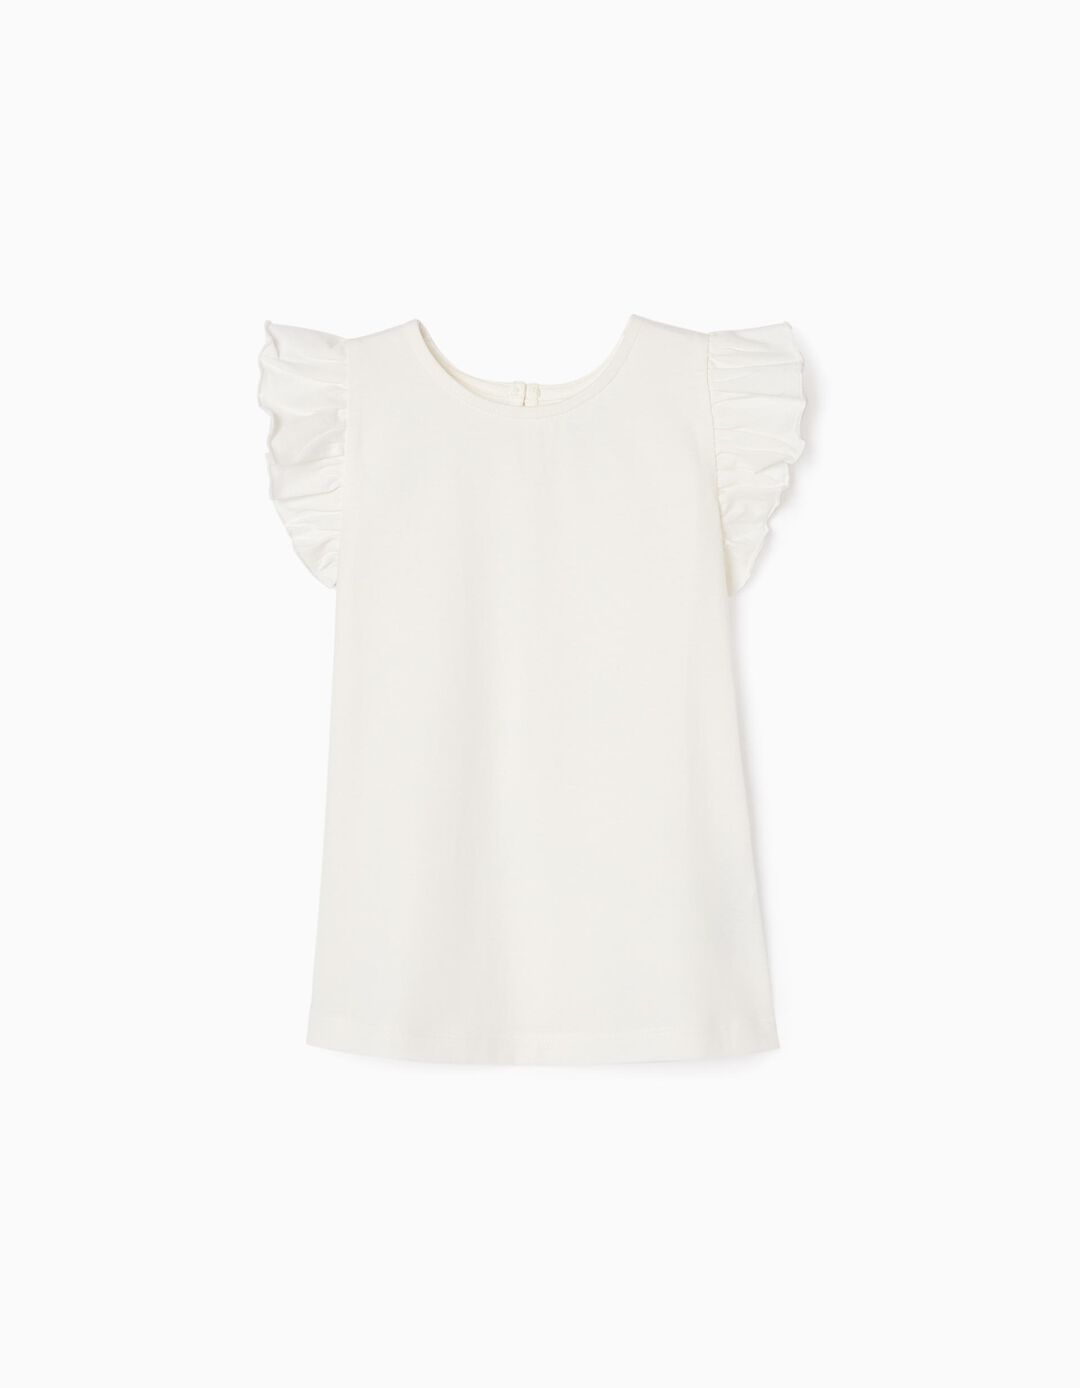 Cotton Sleeveless T-shirt with Frills for Girls, White